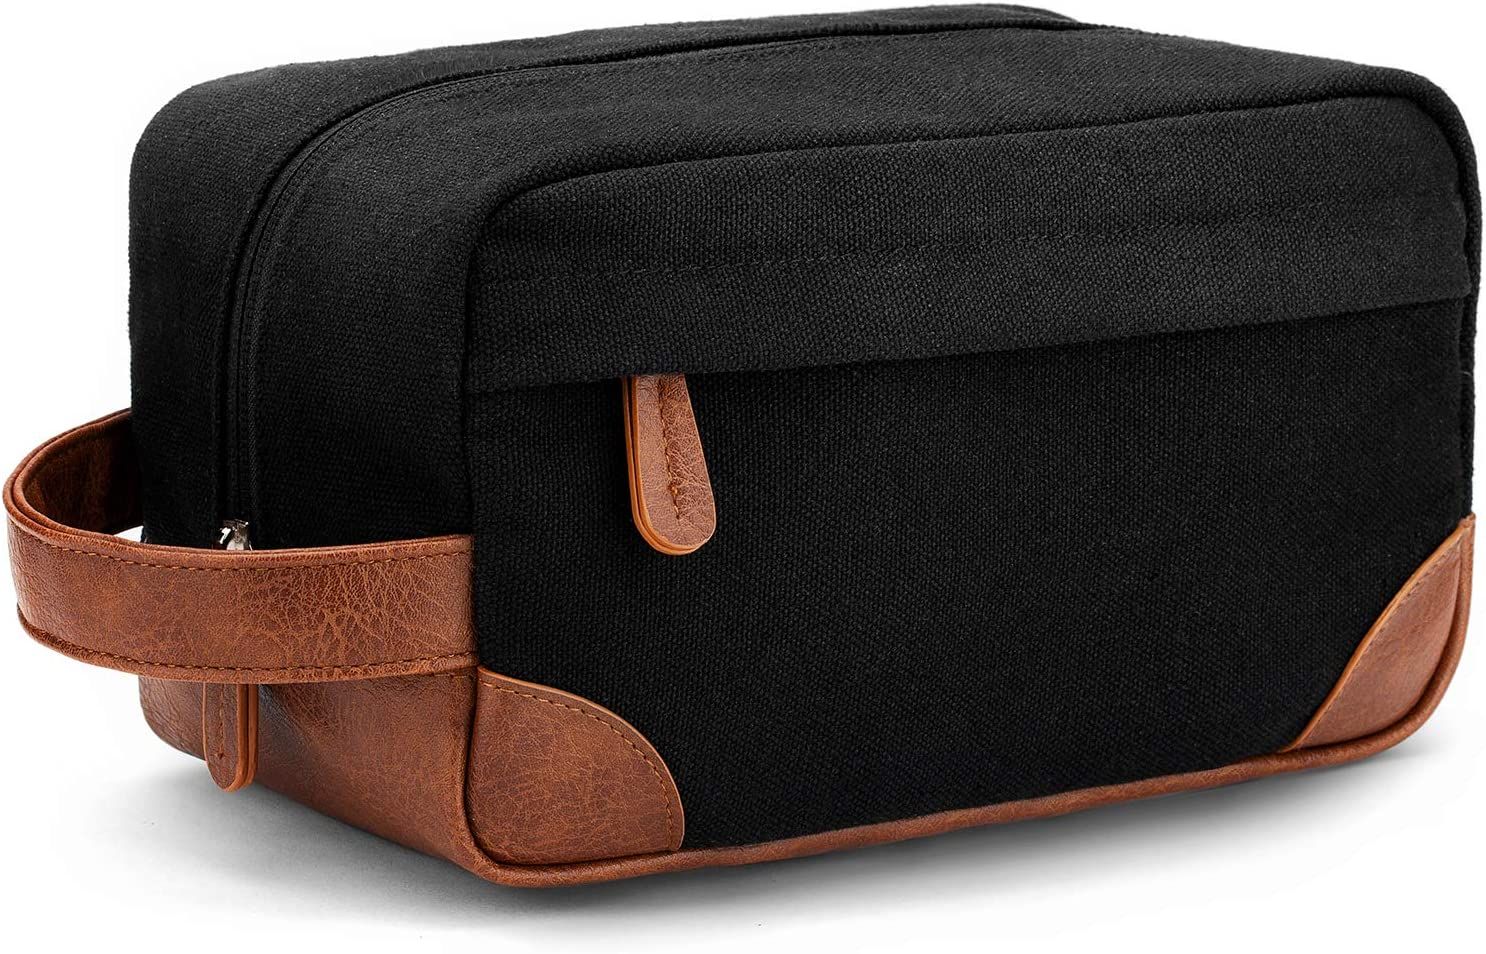 Vorspack Toiletry Bag Hanging Dopp Kit for Men Water Resistant Canvas Shaving Bag with Large Capa... | Amazon (US)